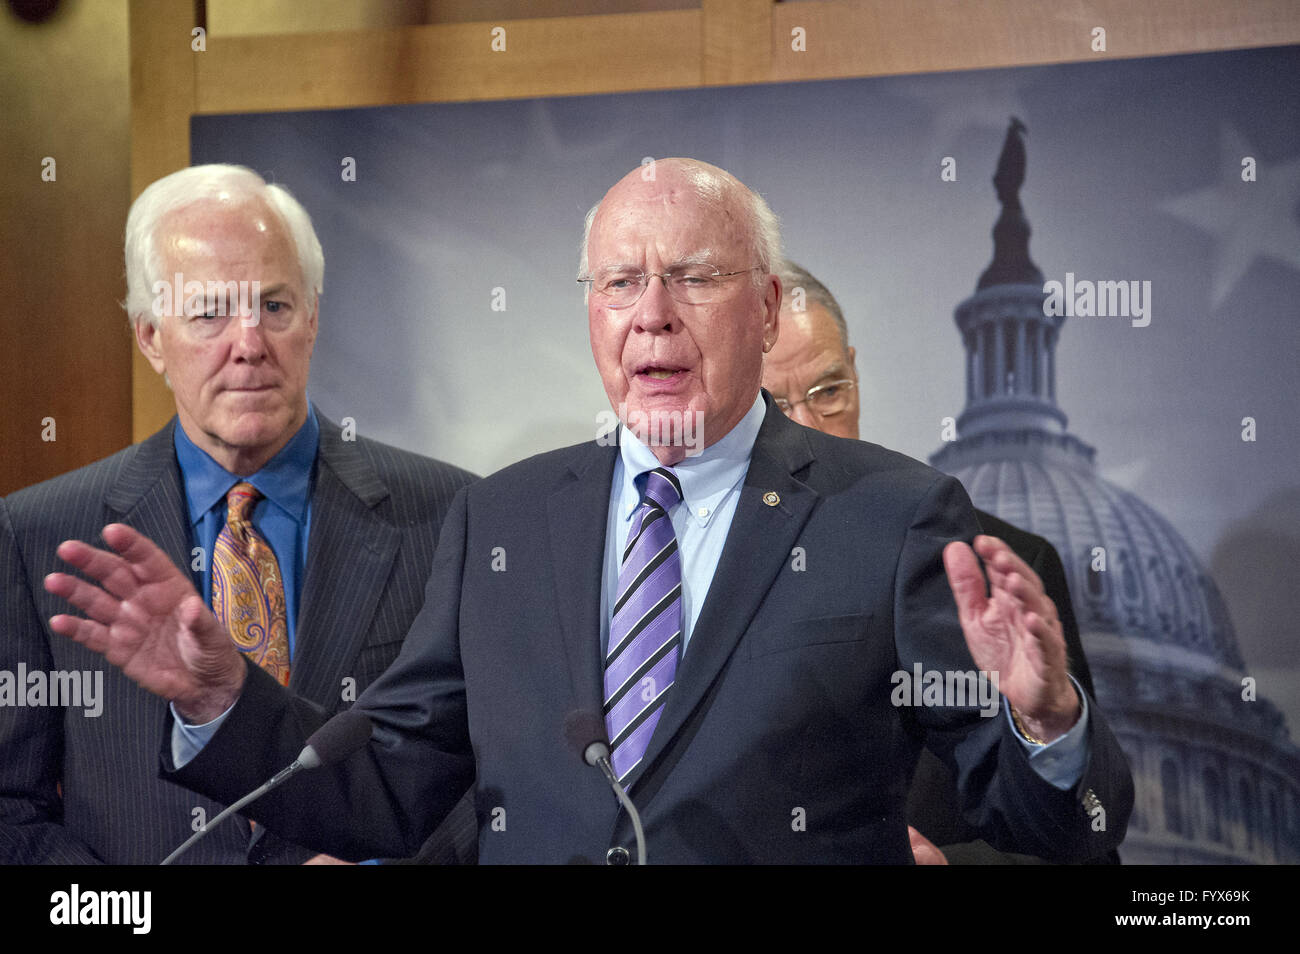 April 28, 2016 - Washington, District of Columbia, United States of America - United States Senator Patrick Leahy (Democrat of Vermont), Ranking Member, US Senate Judiciary Committee, makes remarks during a press conference calling on the US Senate Republican leadership to bring to the floor the bipartisan Sentencing Reform and Corrections Act, a bill to reduce some mandatory minimum sentences and apply those changes retroactively to inmates currently serving unfair sentences. US Senator John Cornyn (Republican of Texas) looks on from left.Credit: Ron Sachs/CNP (Credit Image: © Ron Sachs/C Stock Photo